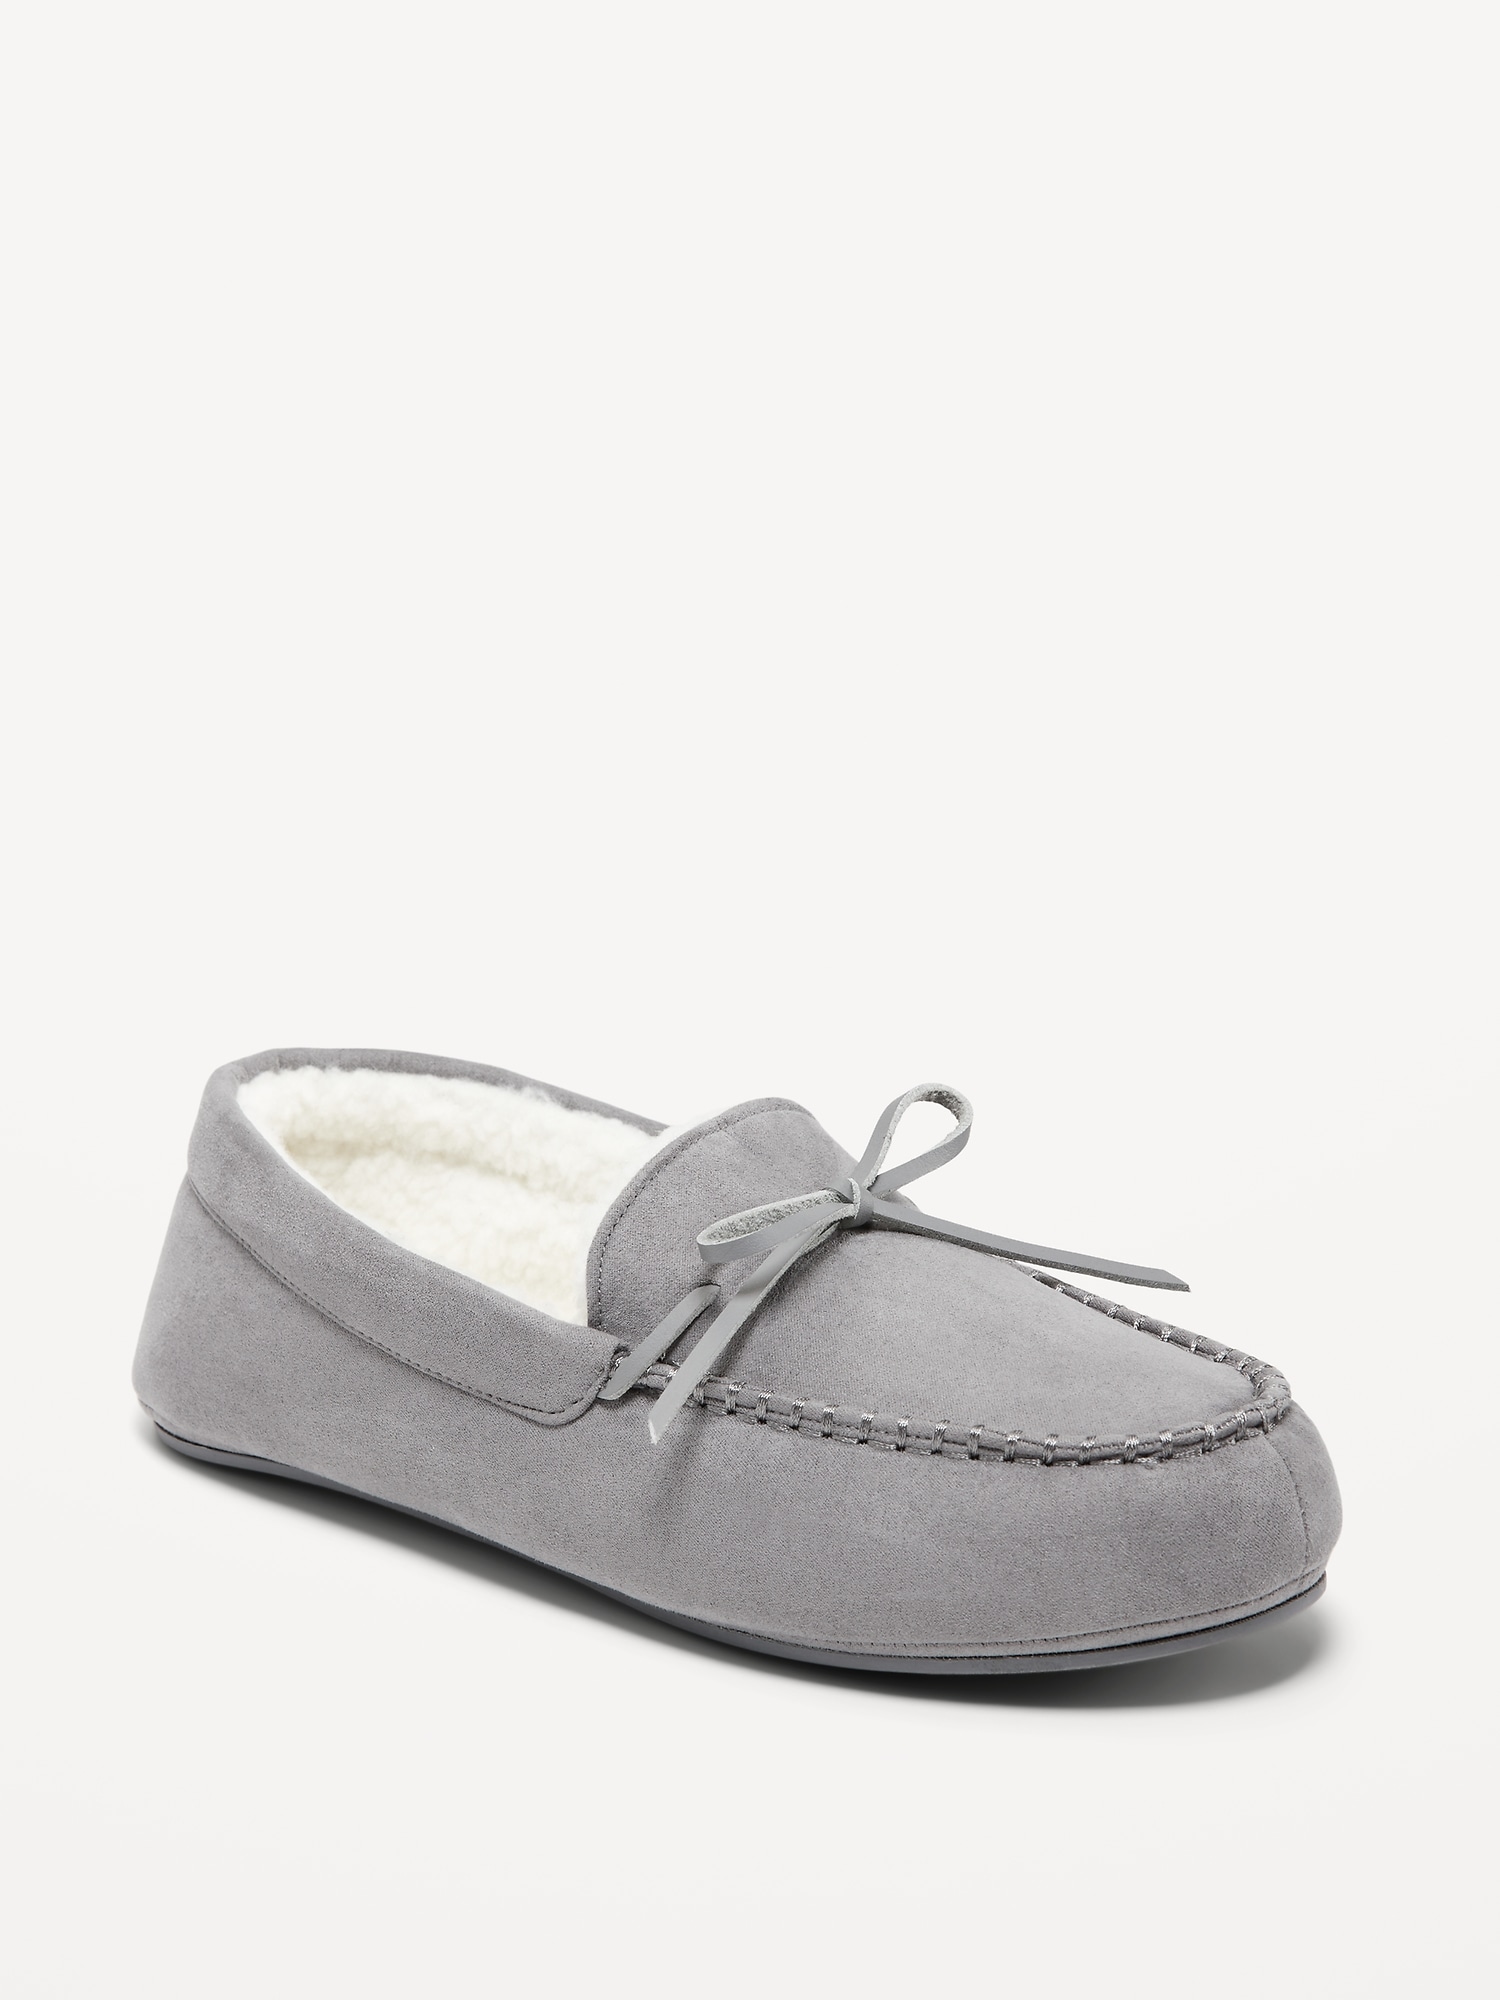 Faux-Suede Sherpa-Lined Moccasin Slippers | Old Navy